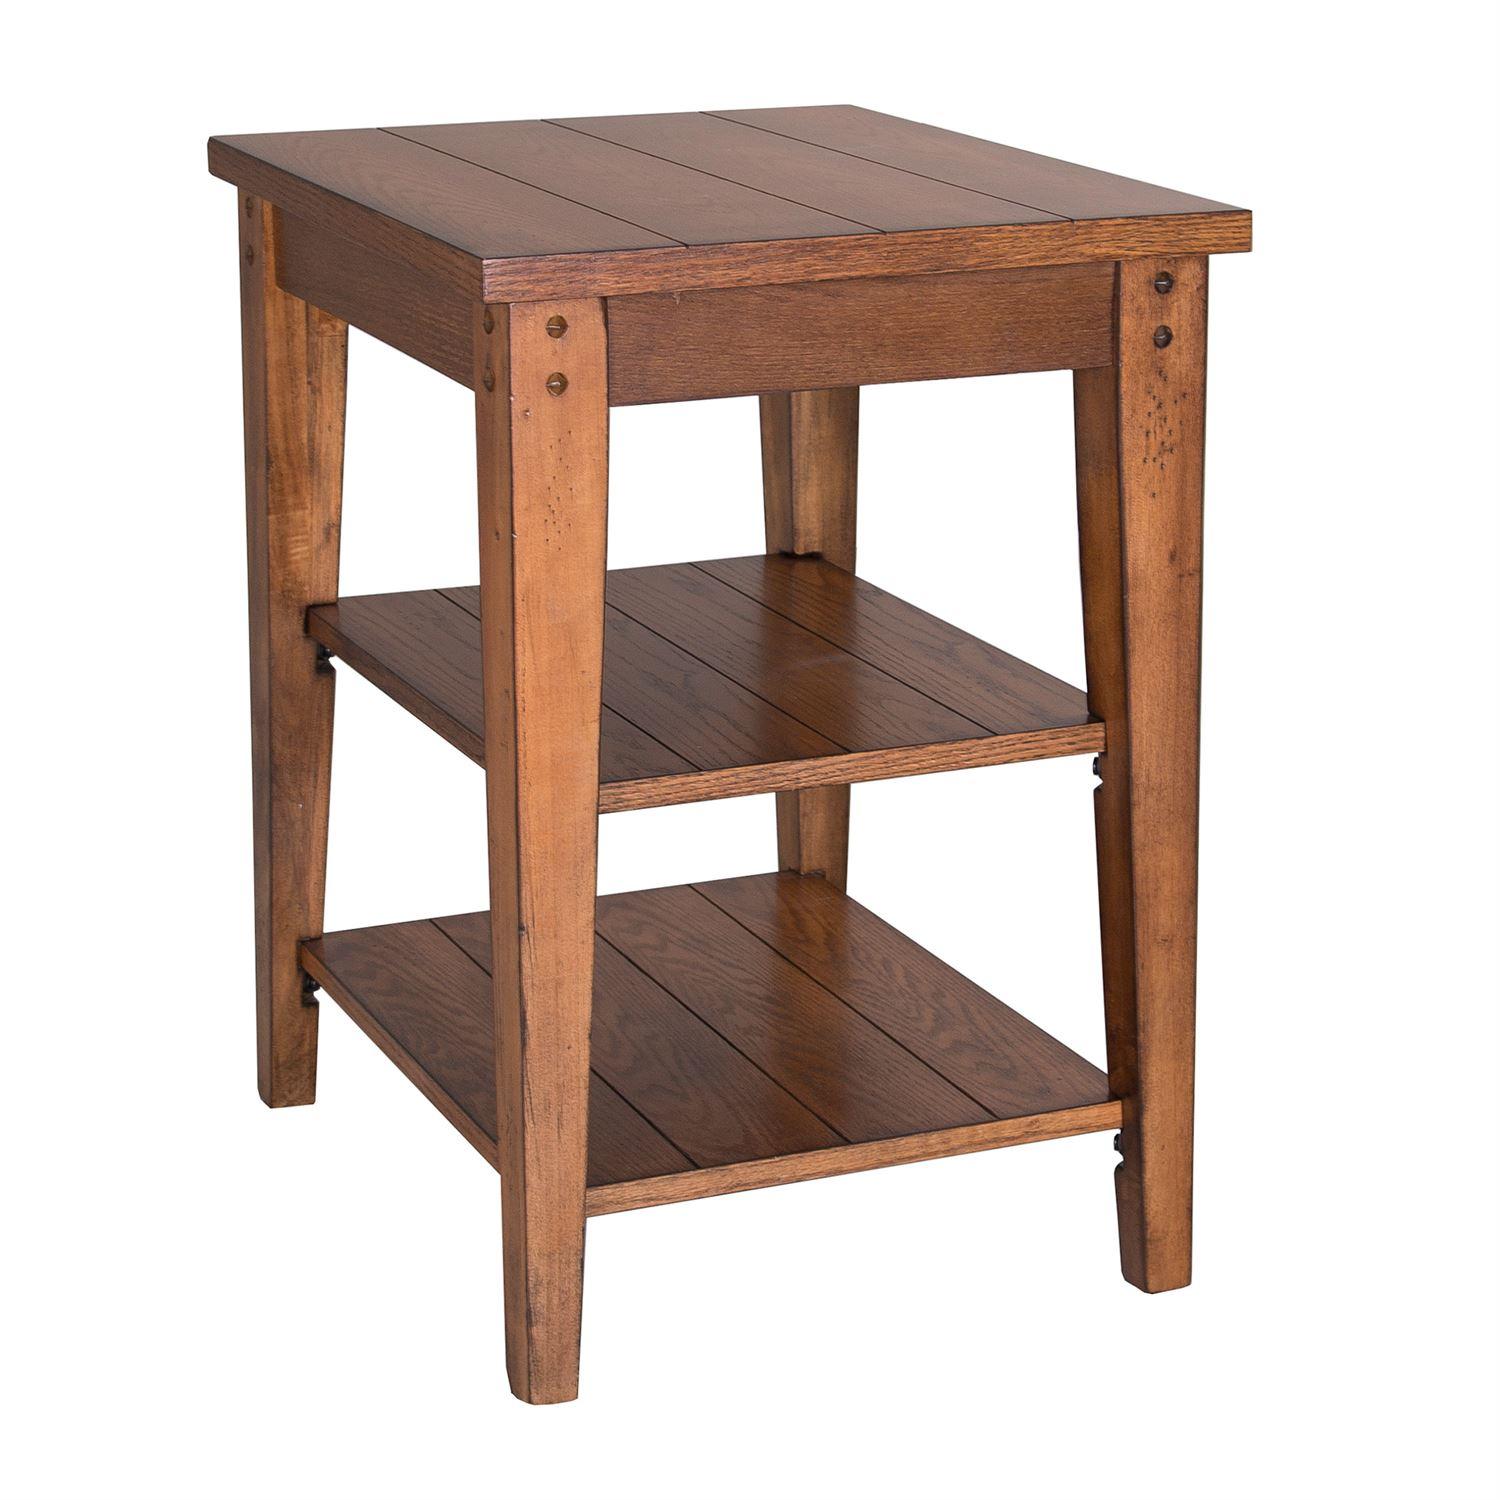 Rustic End Table Lake House  (110-OT) End Table 110-OT1022 in Oak Veneers, Brown Lacquer